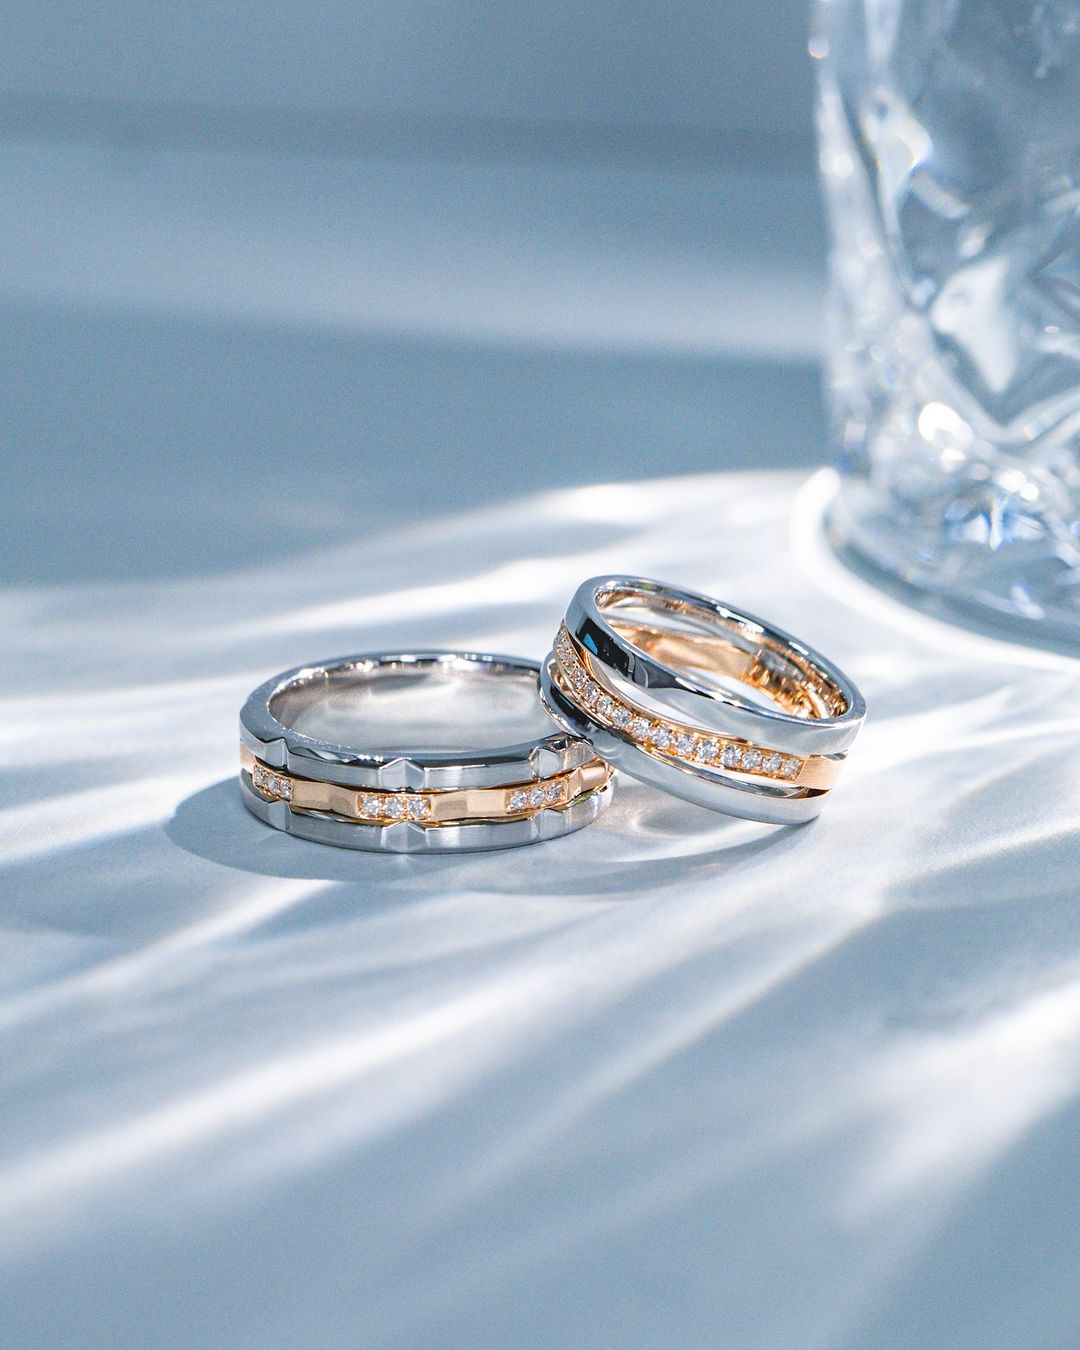 Three Creative Engraving Ideas for Your Wedding Bands - Latest ...